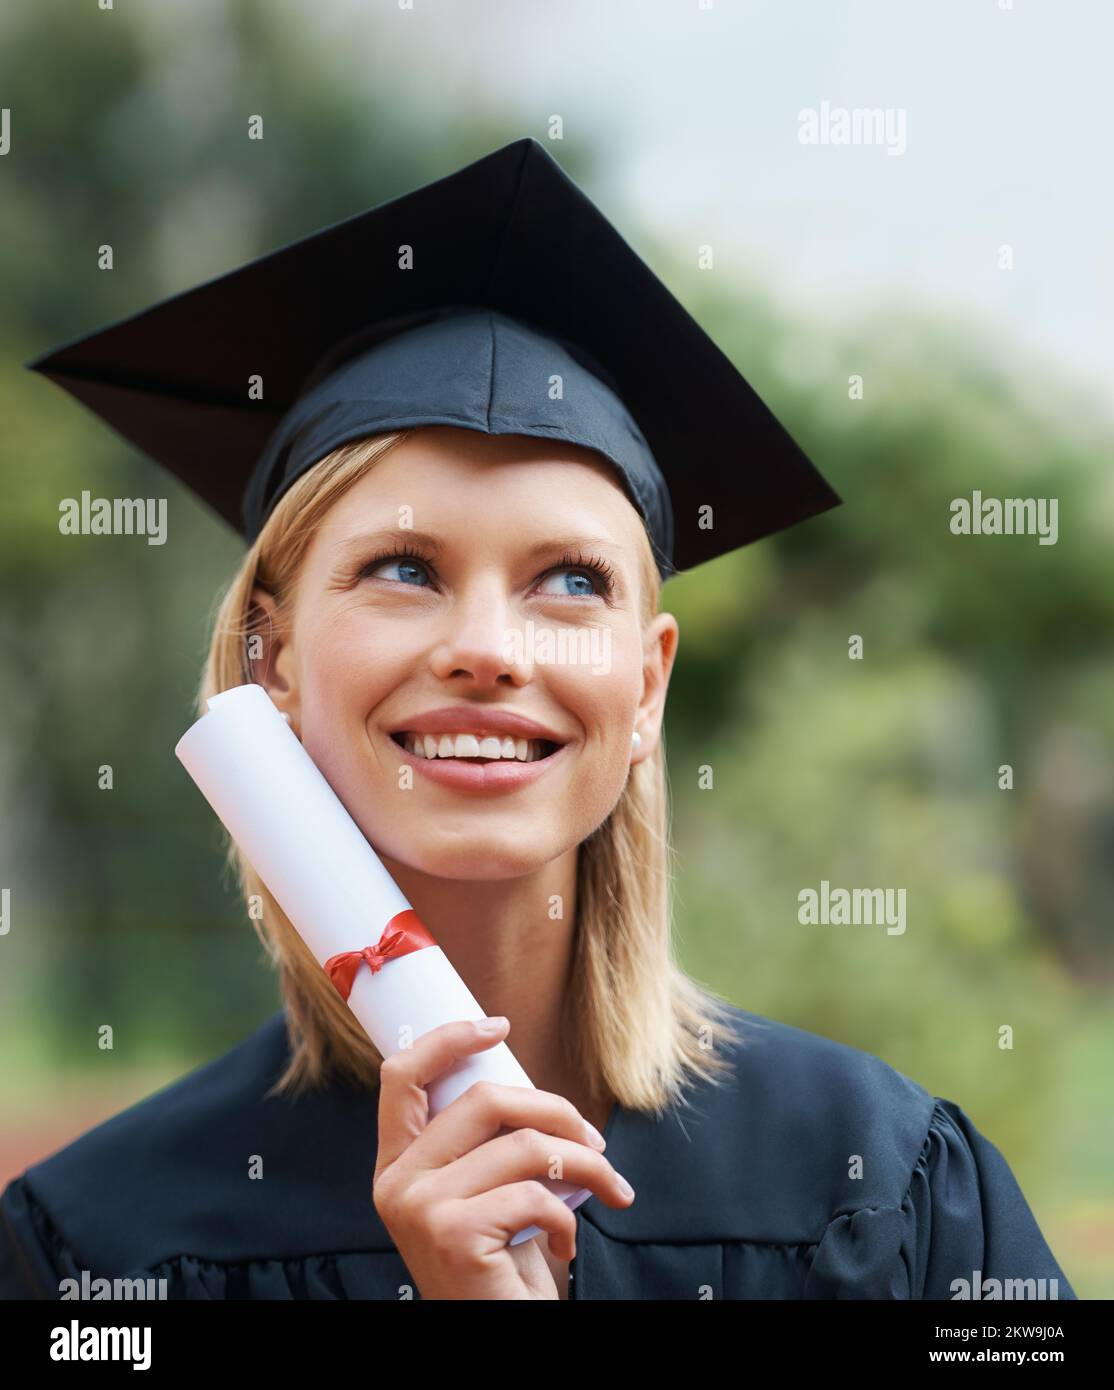 Success puts a smile on her face. A young college graduate wearing cap and gown while looking away and smiling. Stock Photo